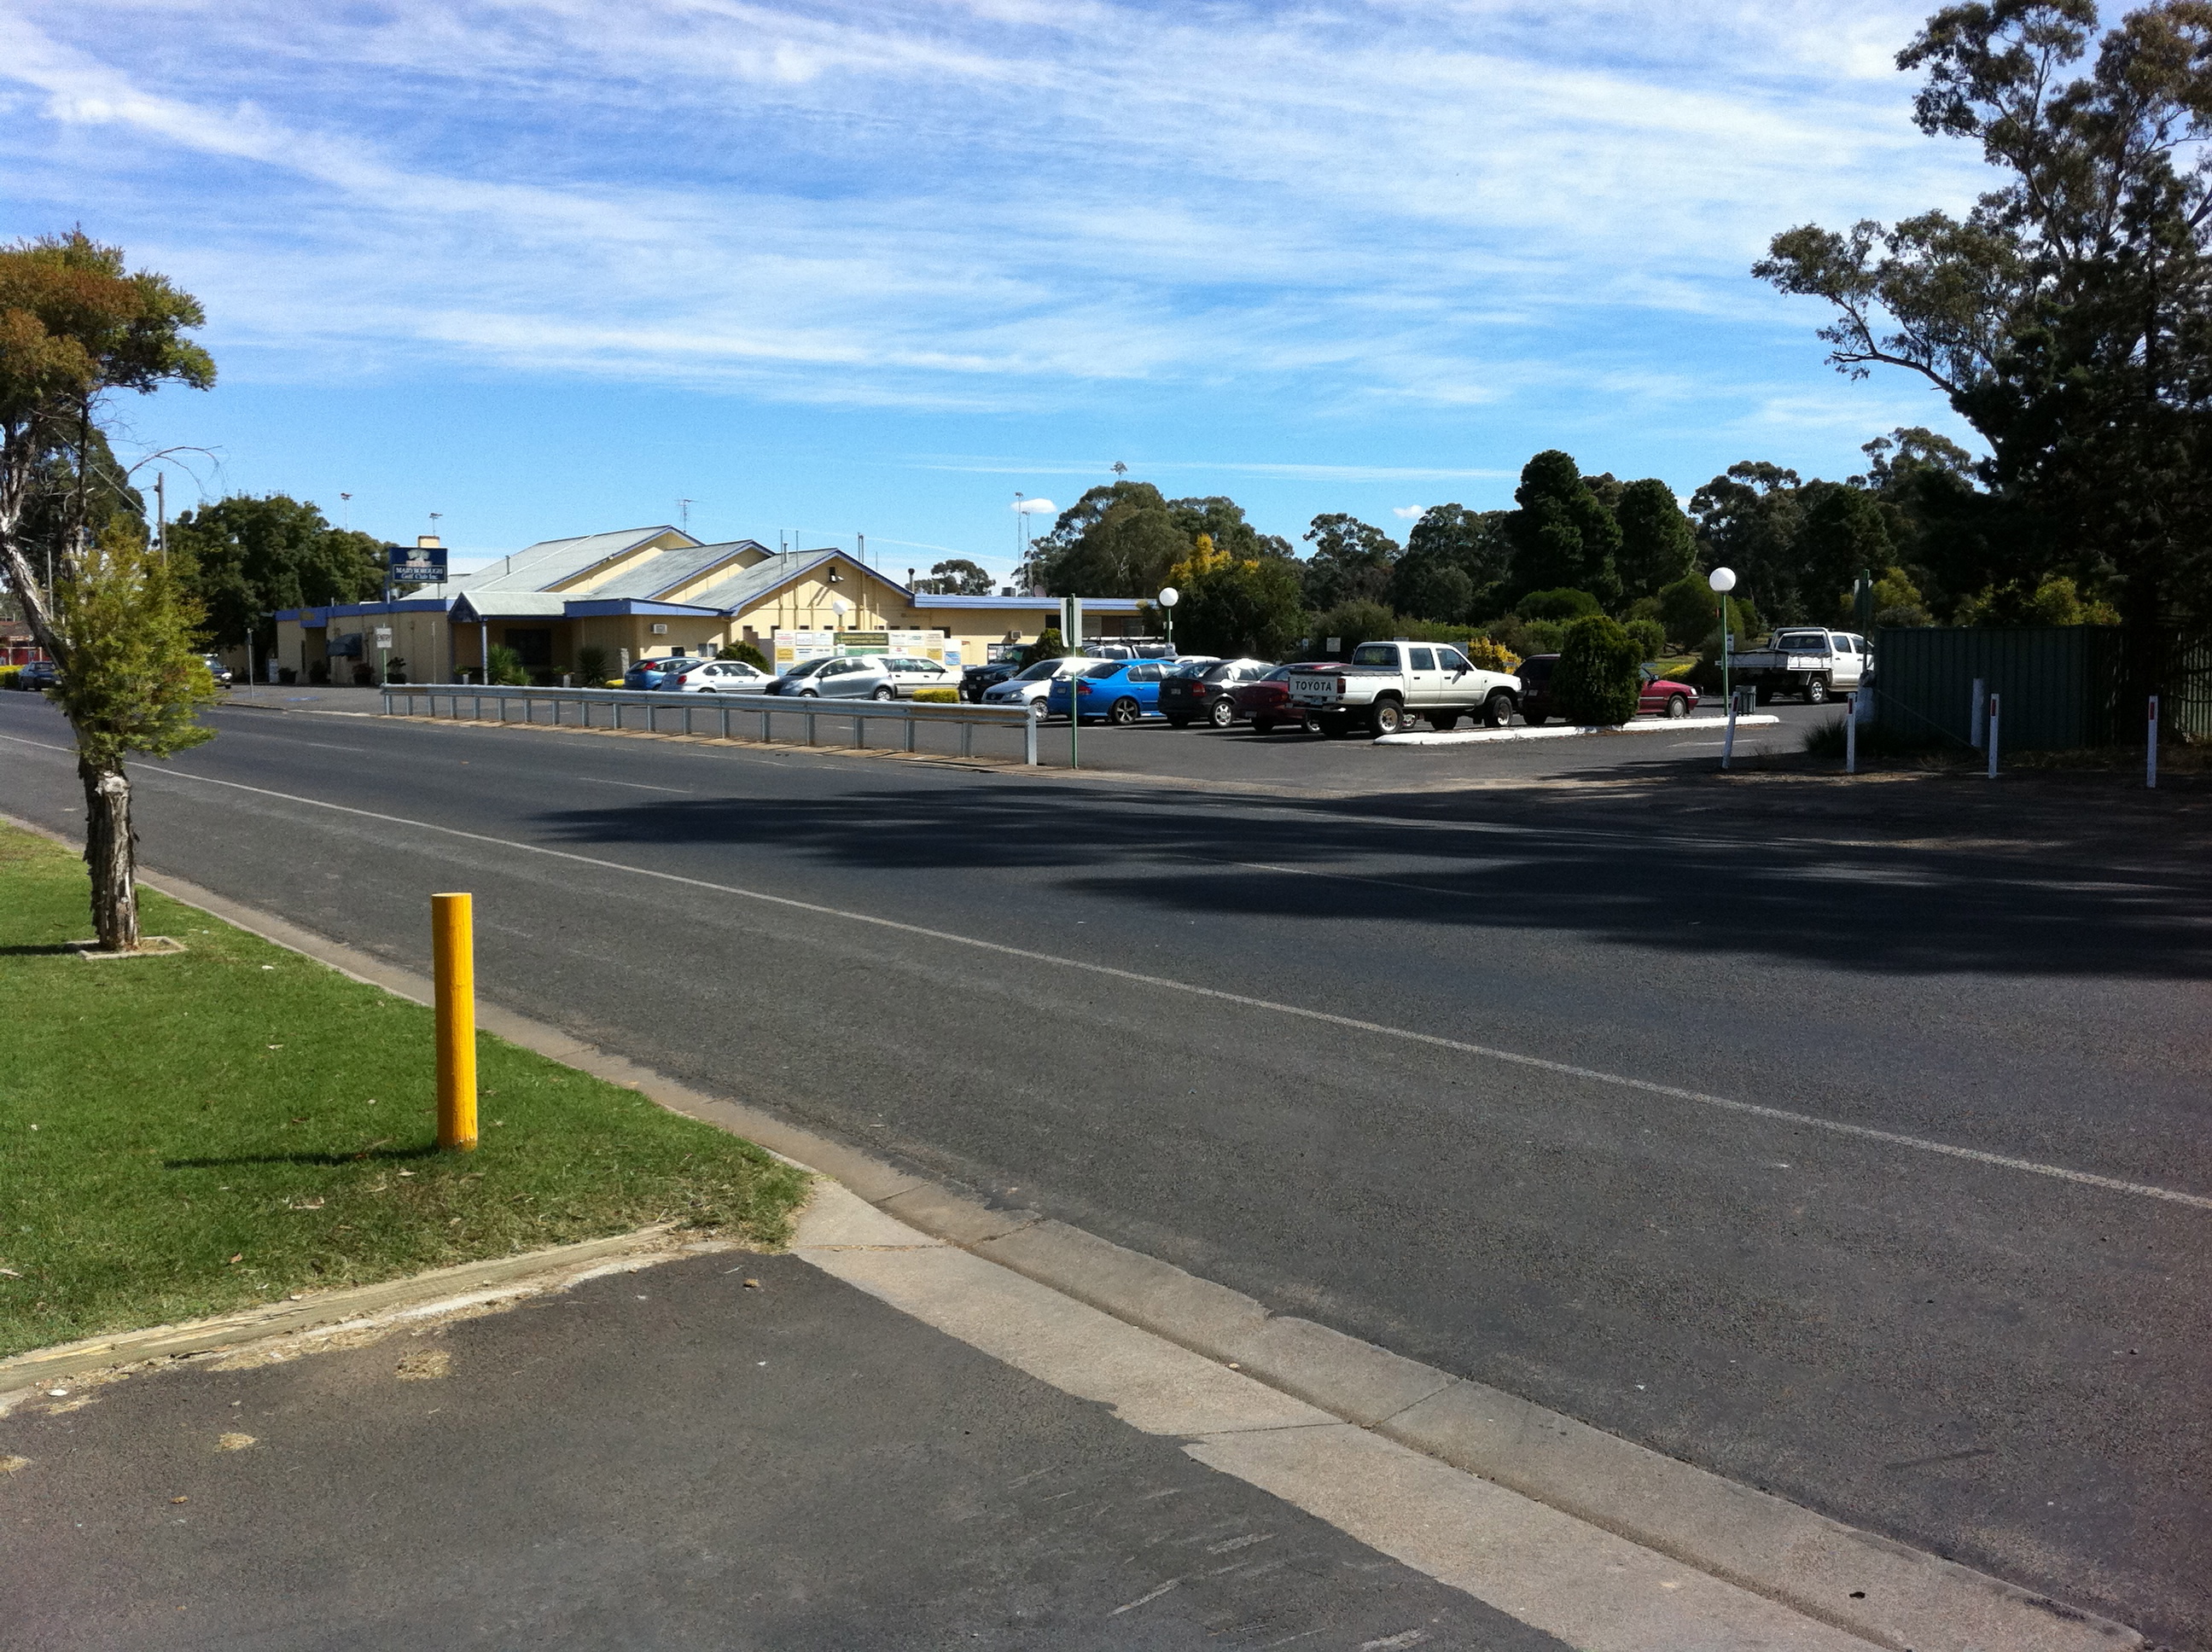 Golden Country Motel and Caravan Park - Maryborough: The park is located at 134 Park Road, Maryborough